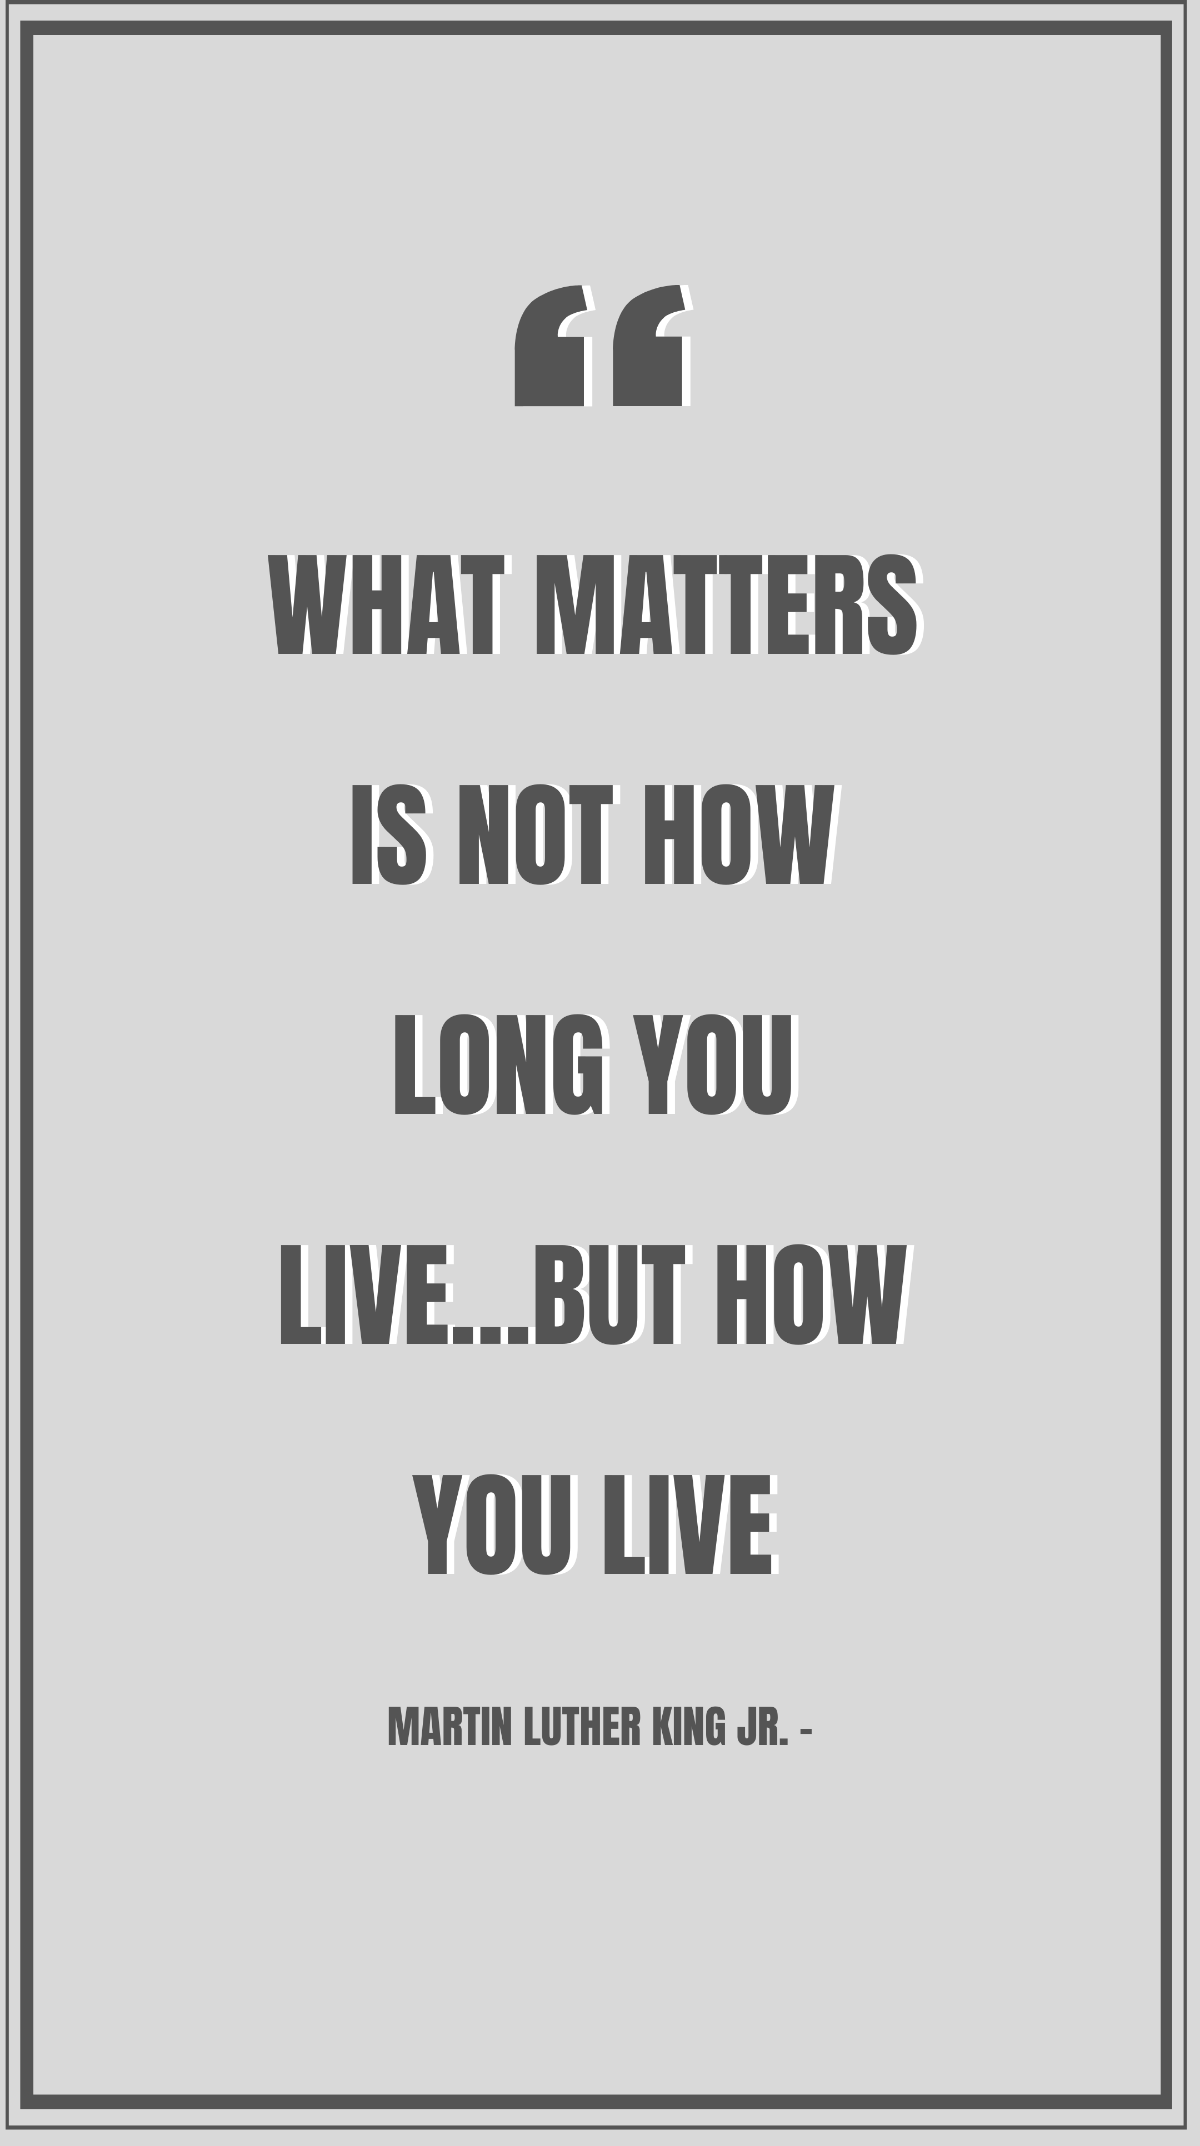 Martin Luther King Jr. - What matters is not how long you live…but how you live Template